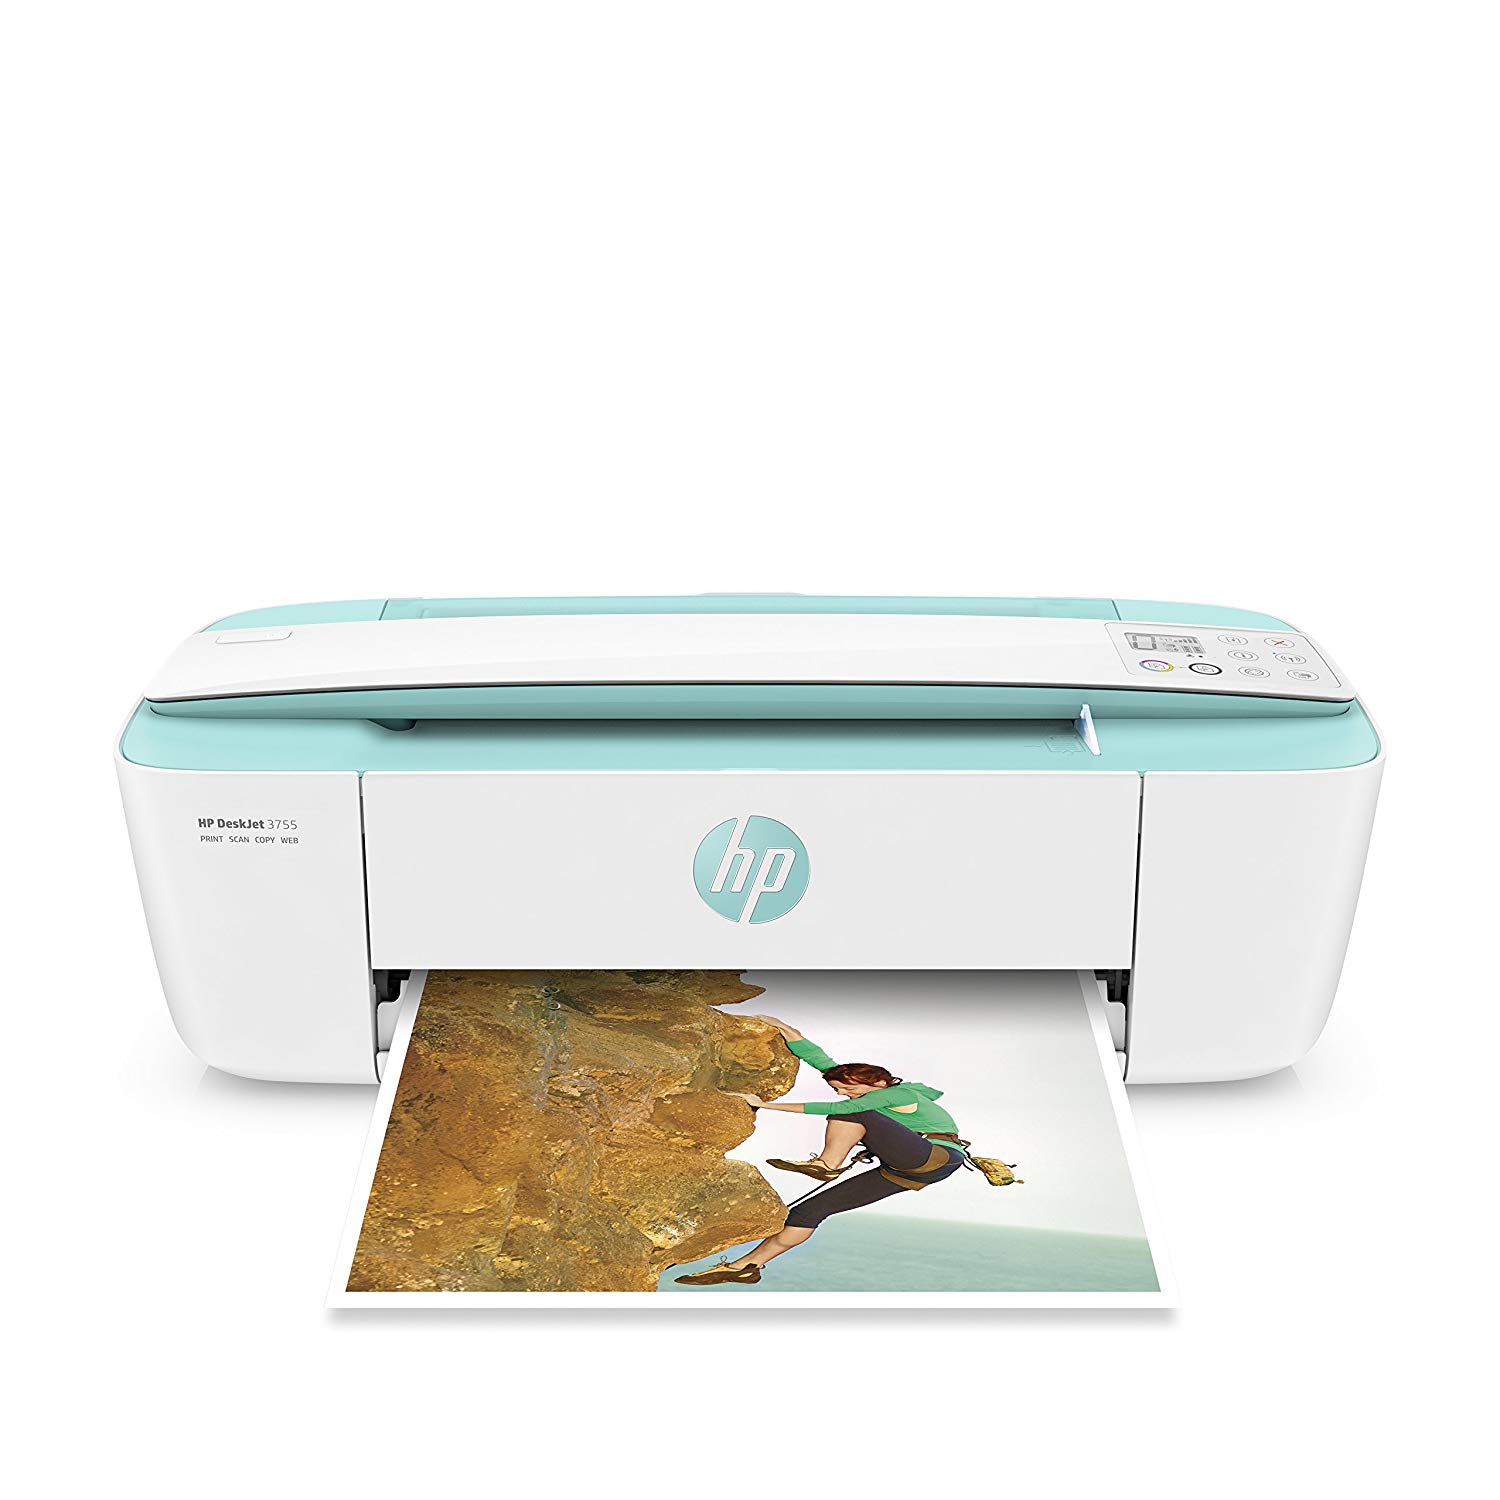 hp worlds smallest all in one printer video